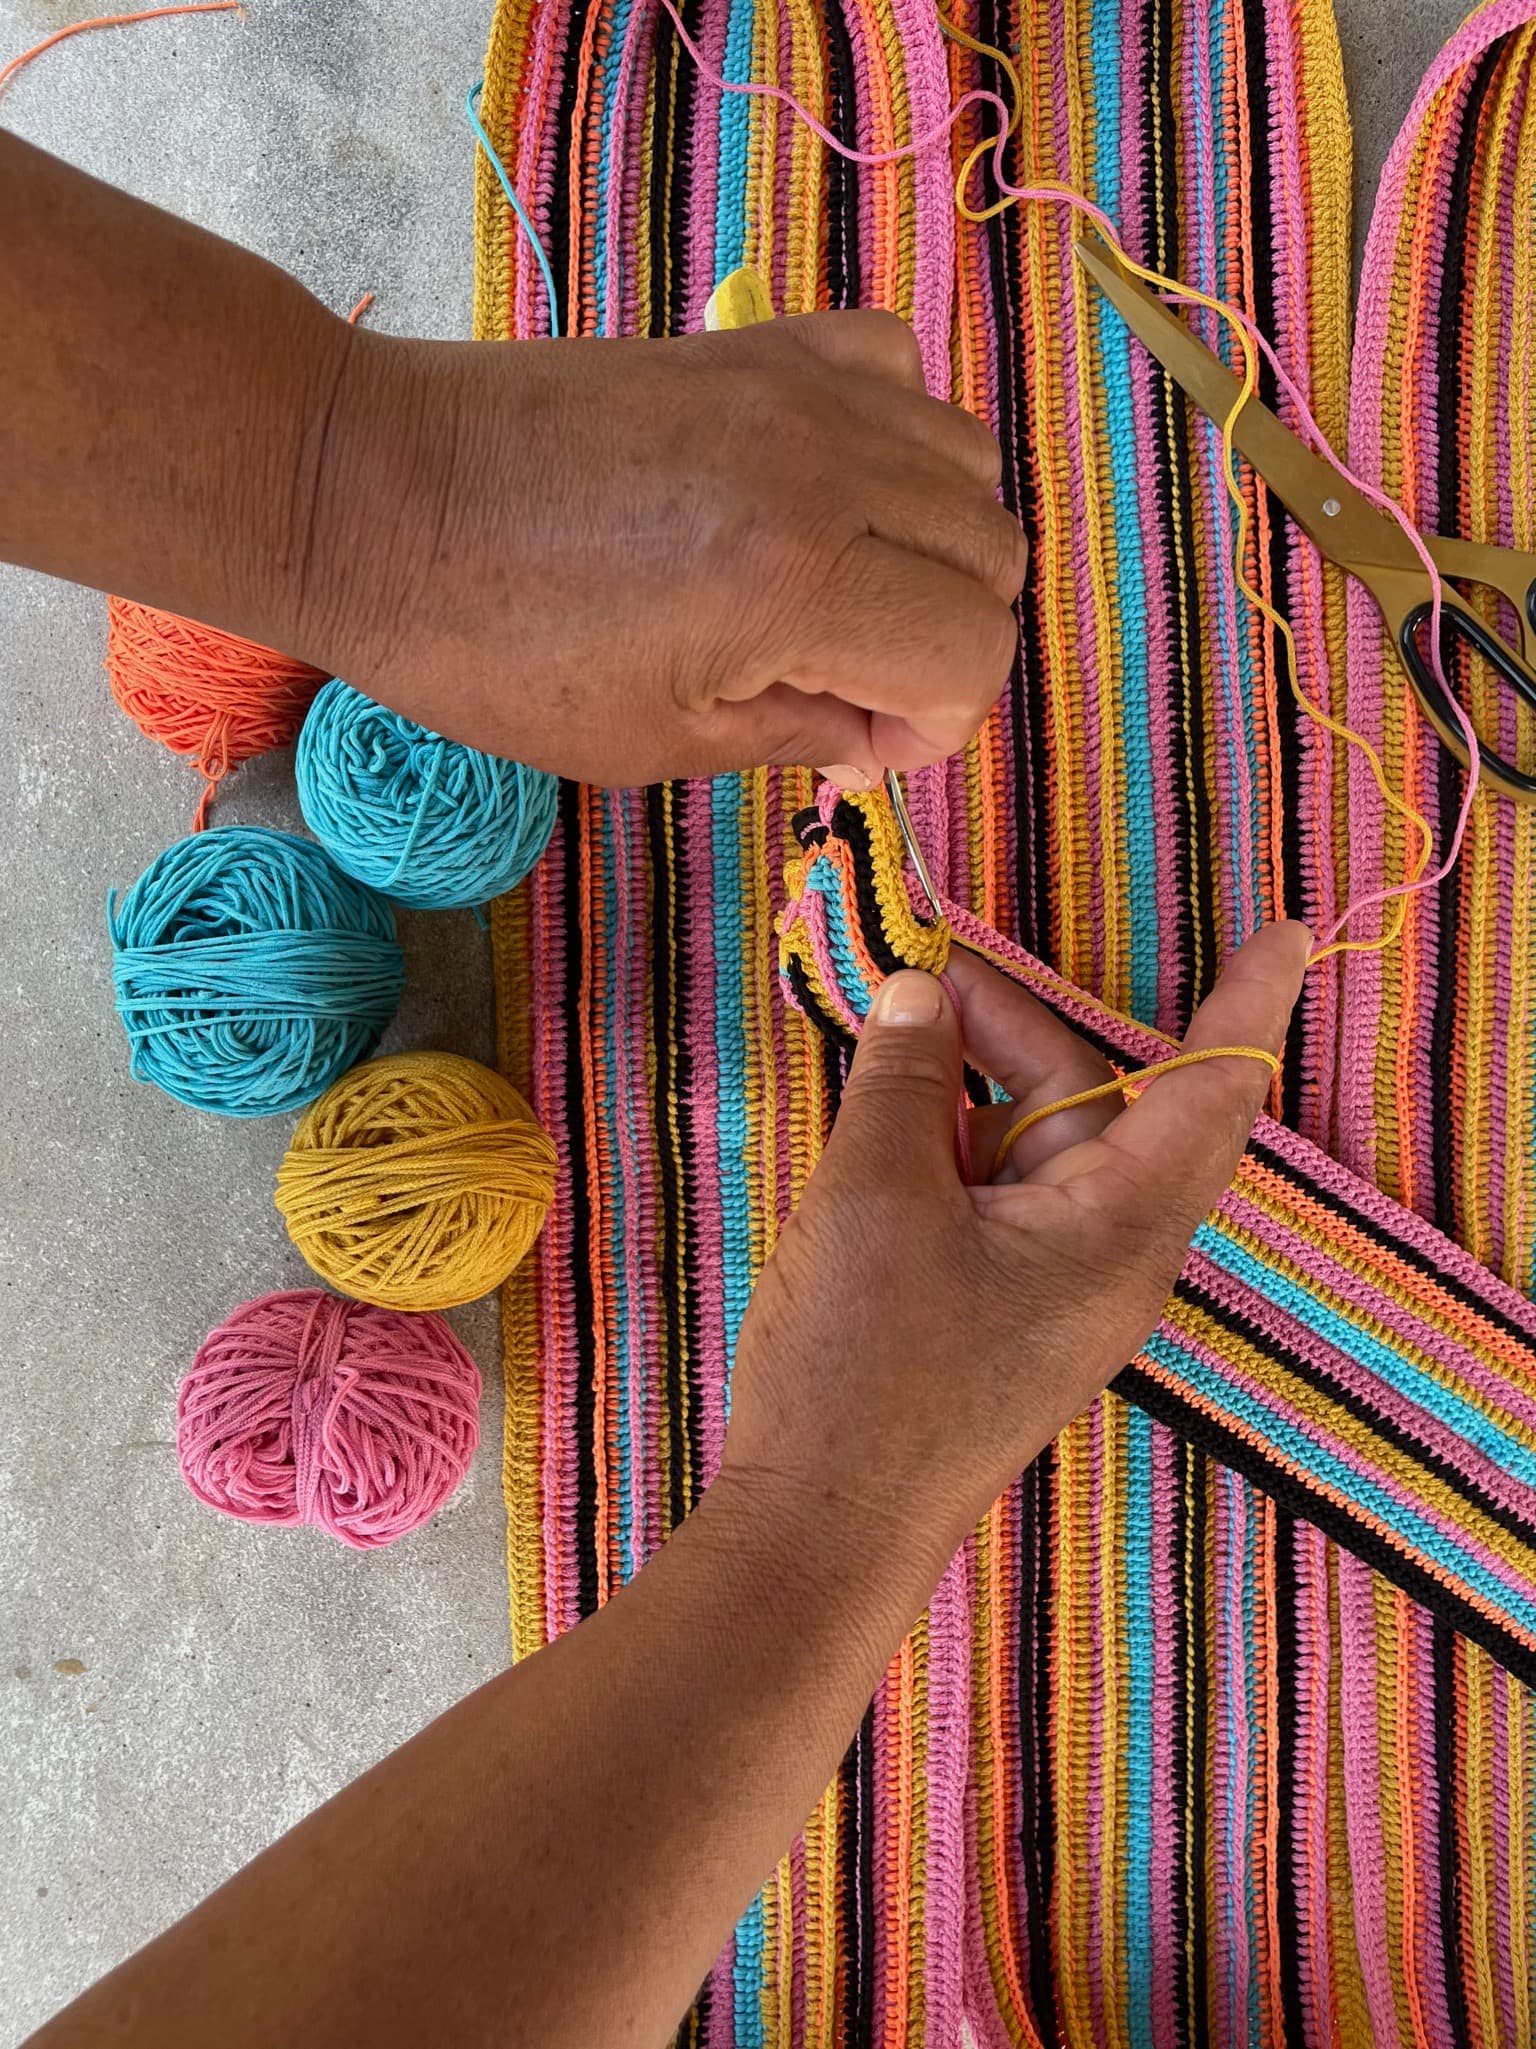 A  close-up image of two hands weaving a long strip of colorful textile.  